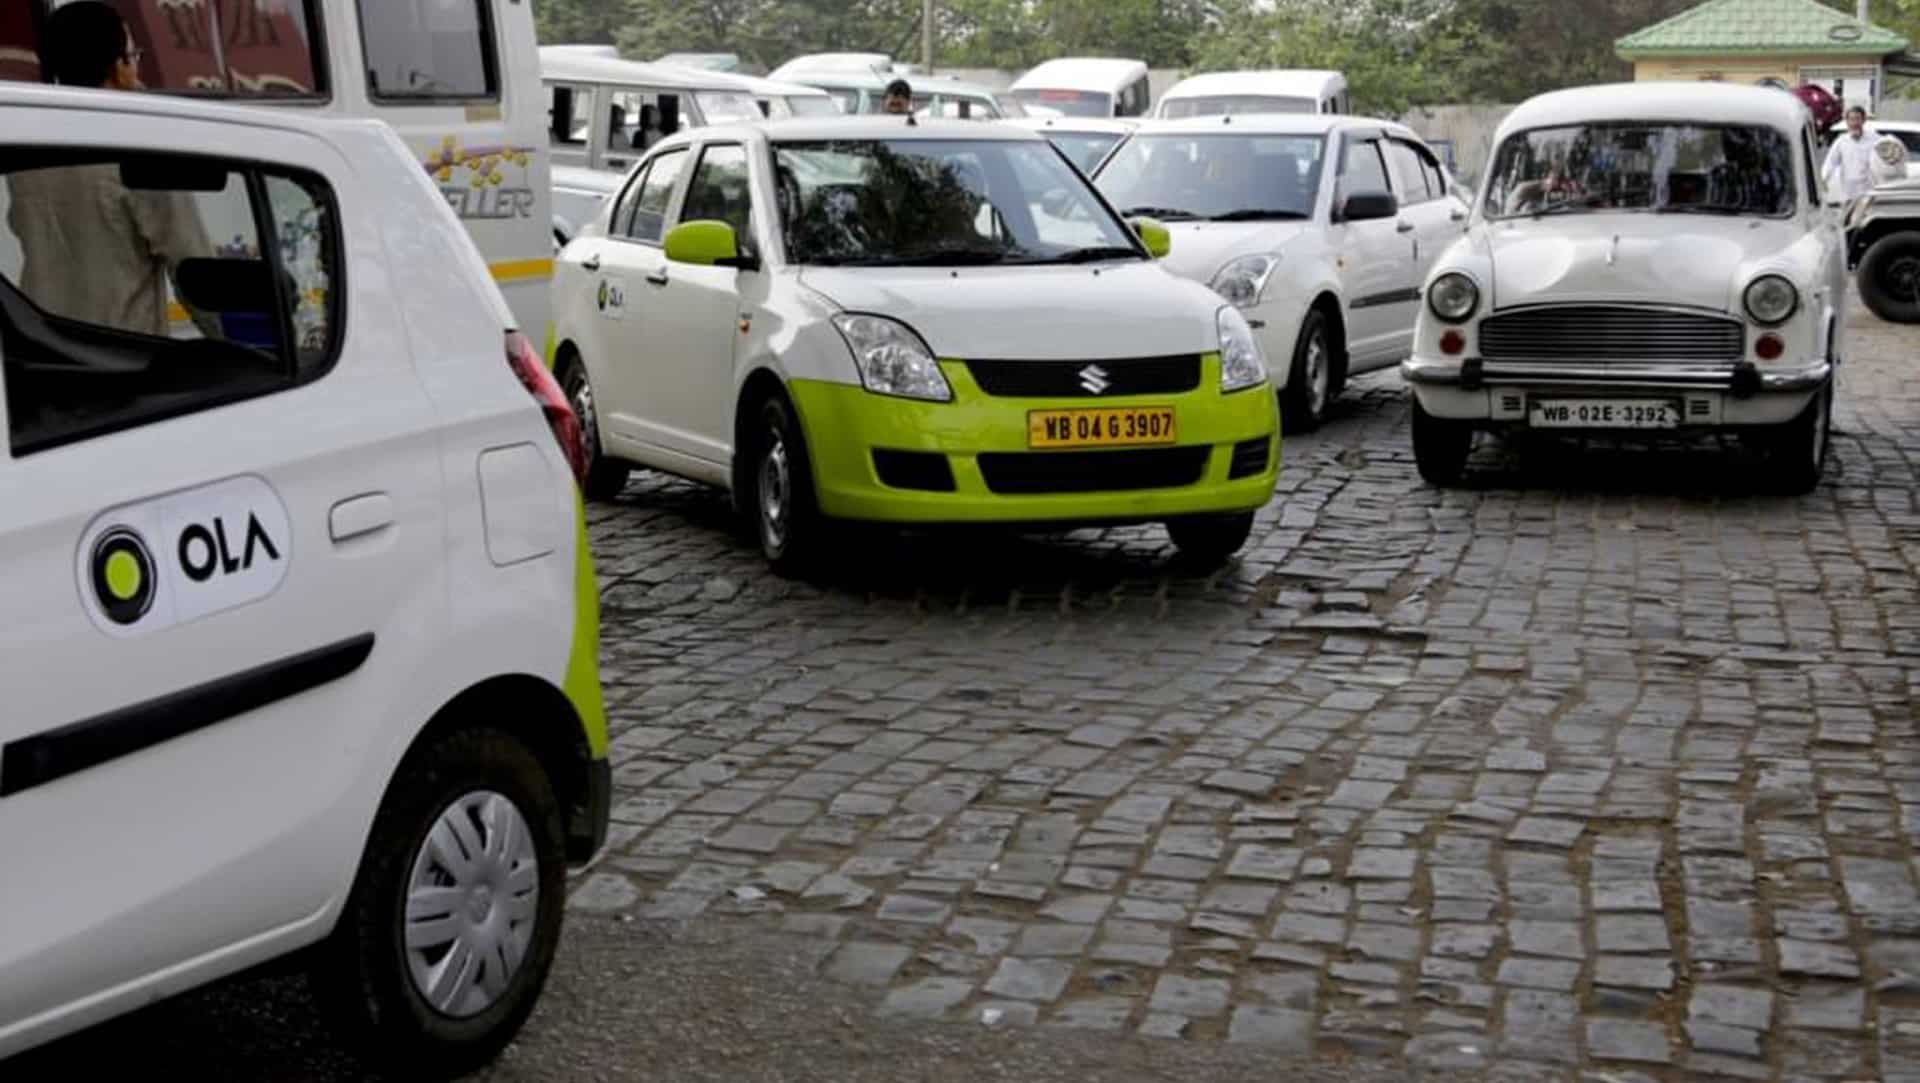 Ahead of IPO, Ola's CFO and COO to exit company, says report